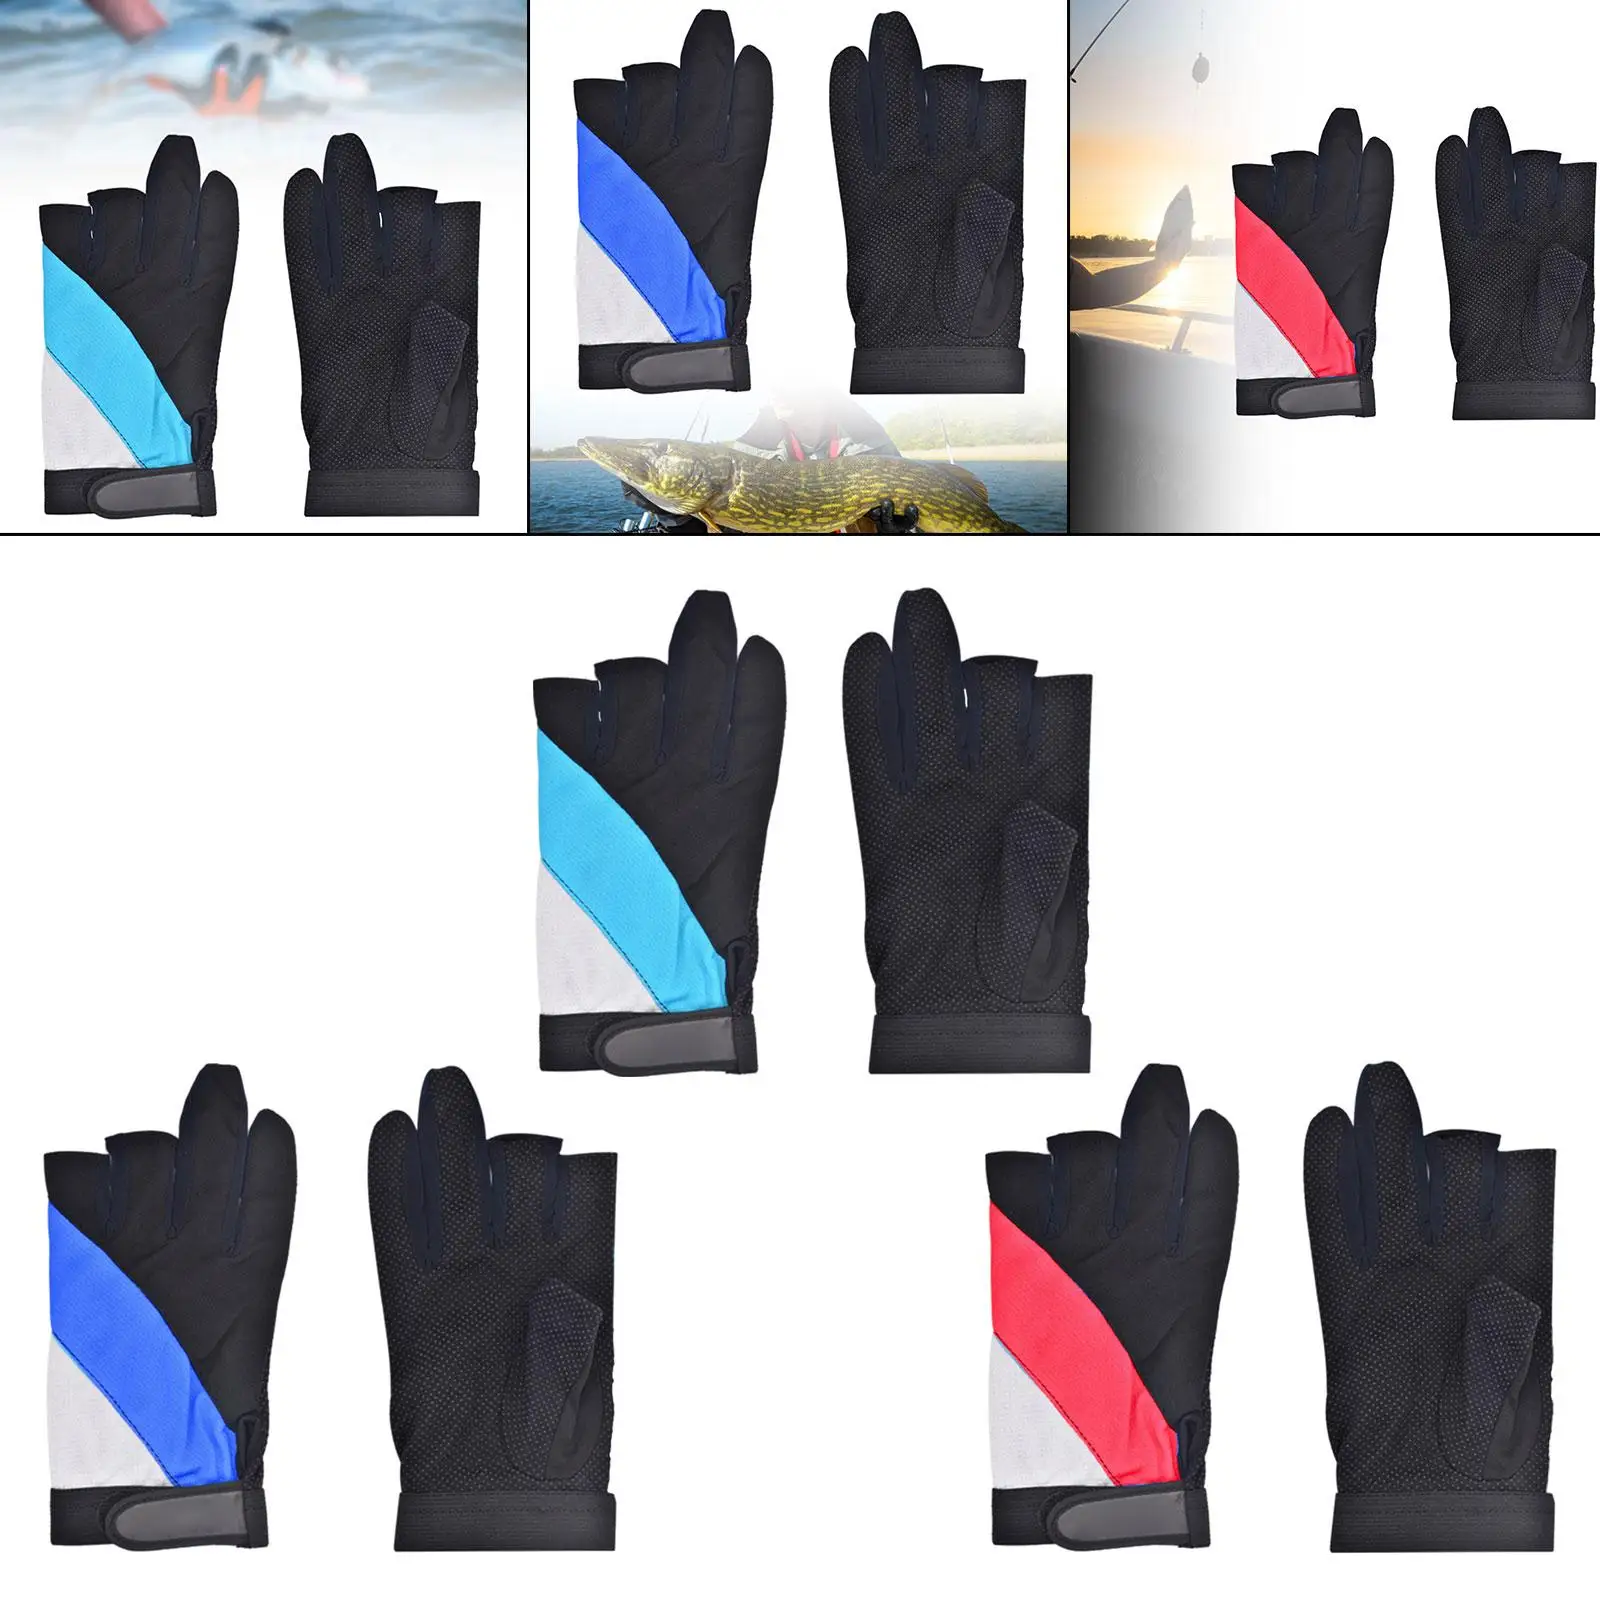 3 Cut Fingers Gloves 3 Fingerless Cycling Gloves for Camping Cycling Hiking